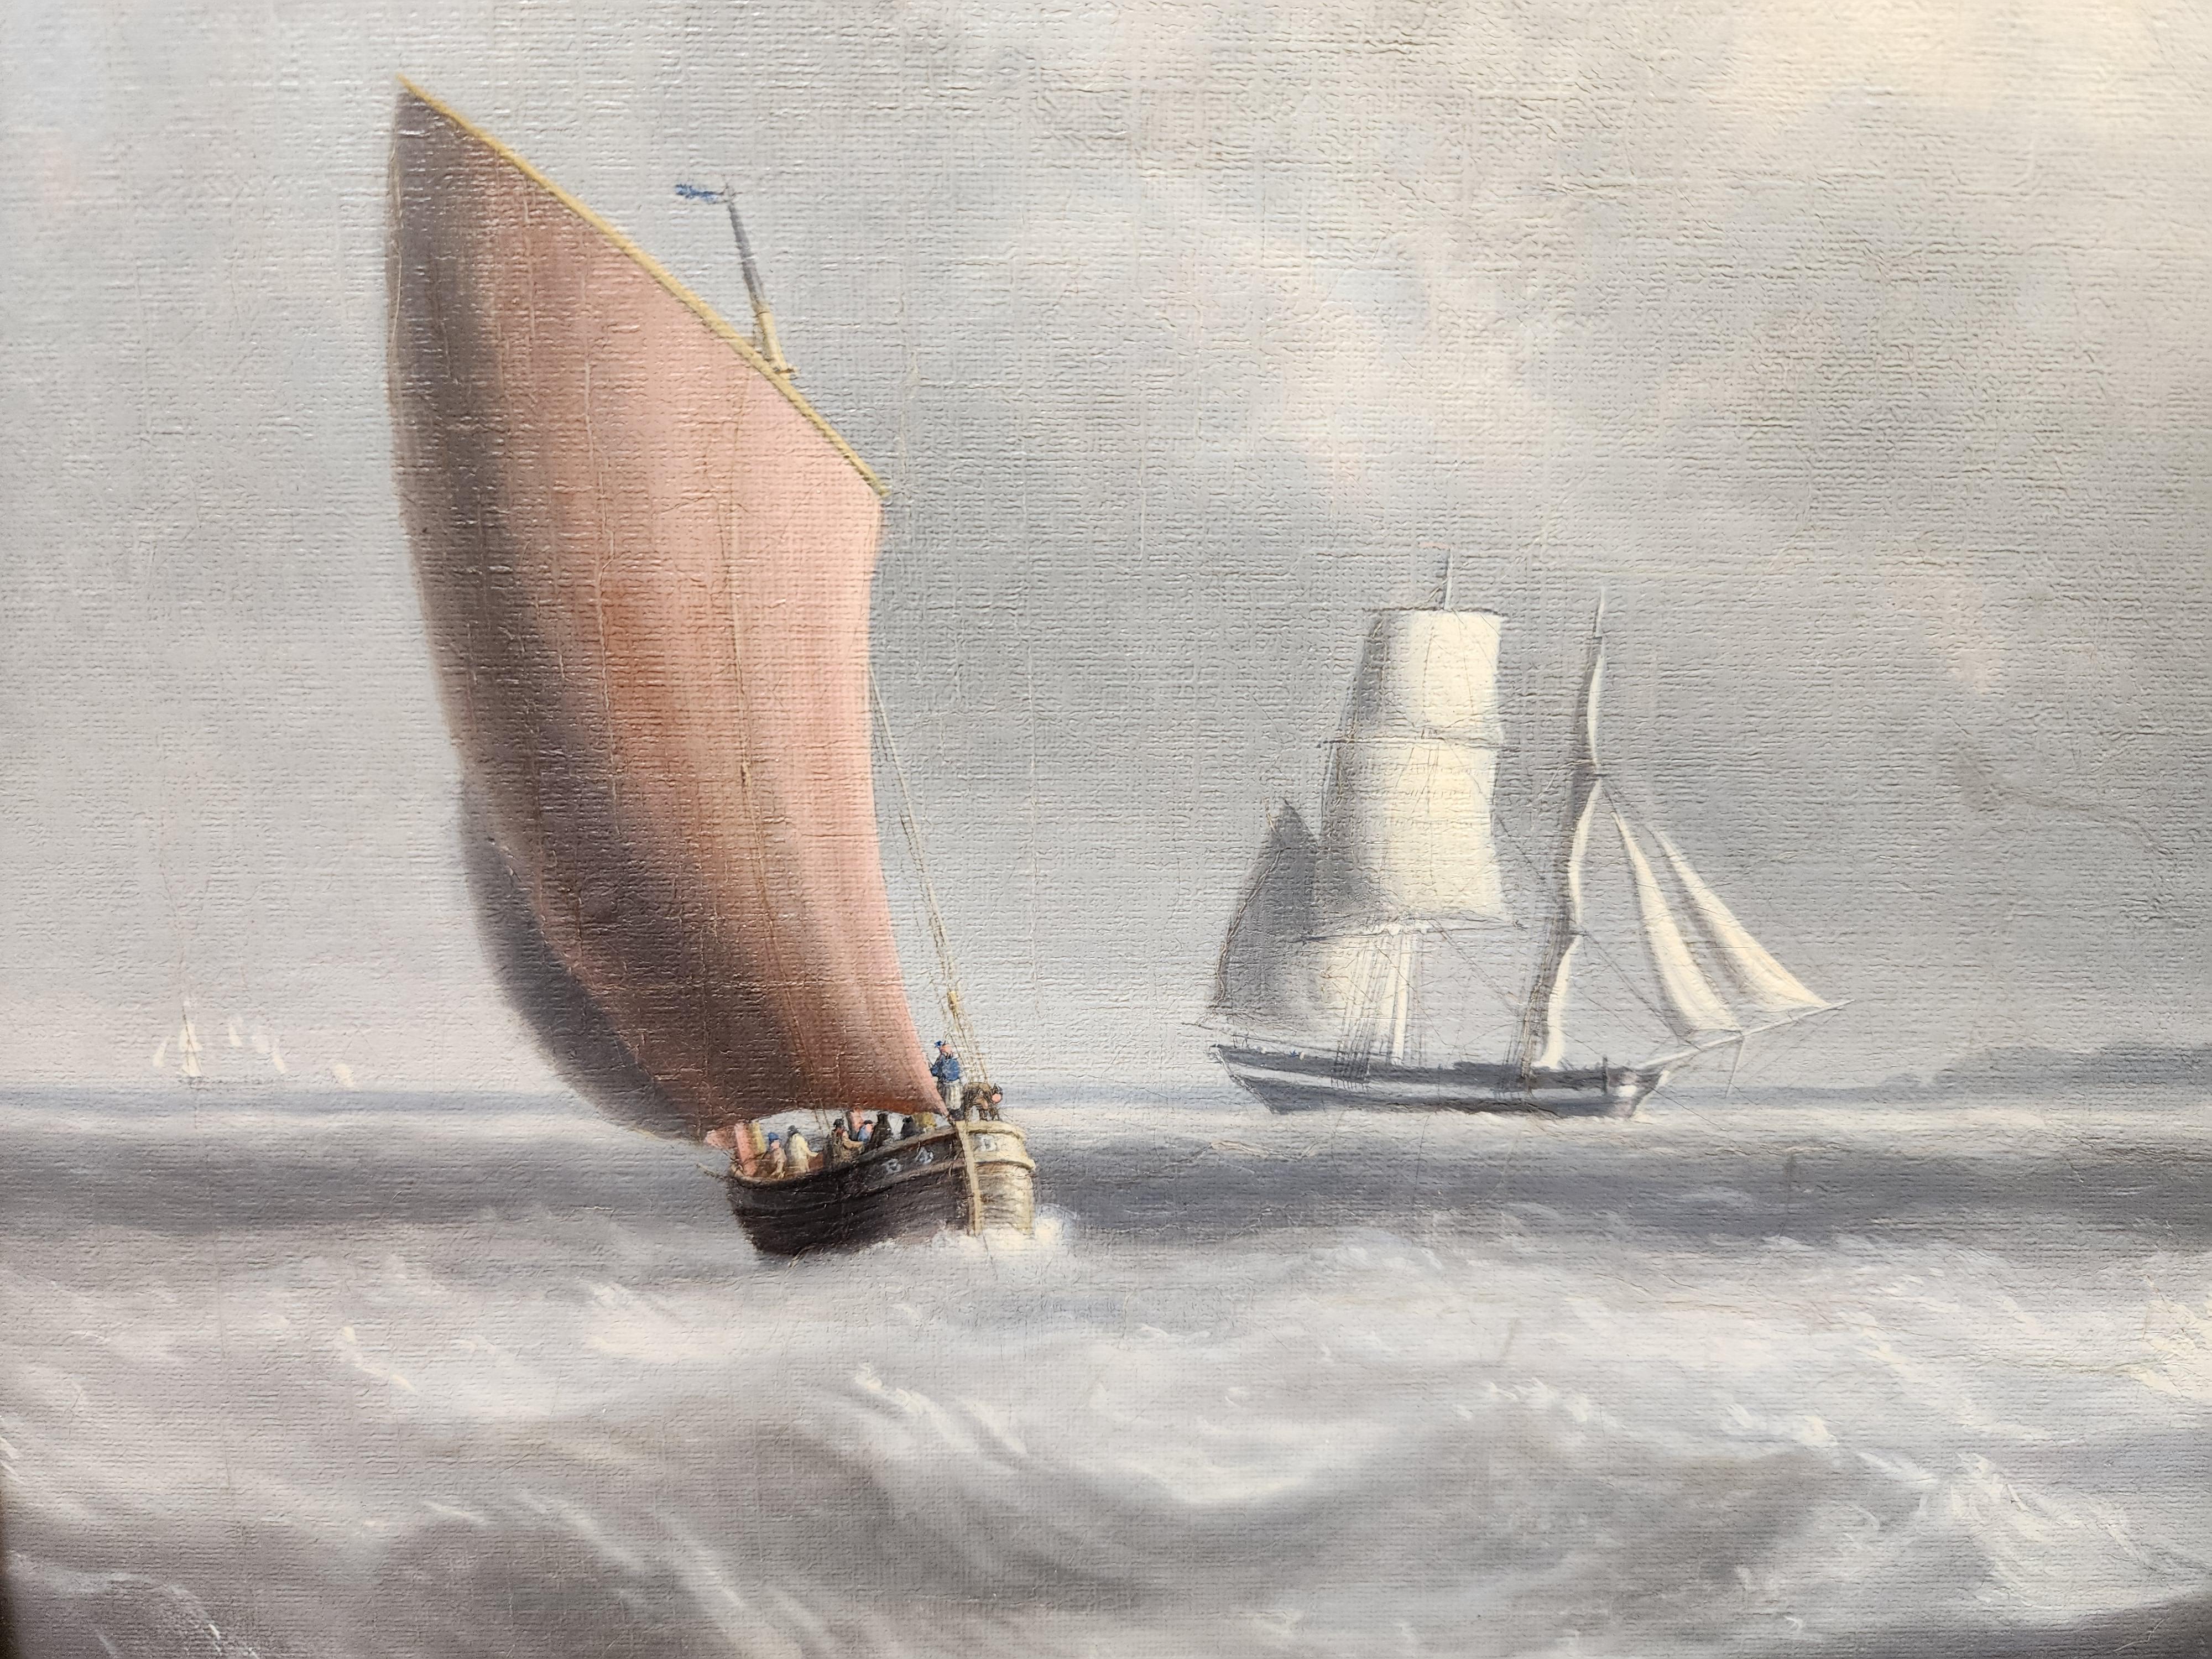 John Clay (British, c.1800- c.1860)
                                    
Merchant Vessel in The English Channel, c. 1840s

Oil on Canvas

15” x 20.5”

Housed in a 2 3/4